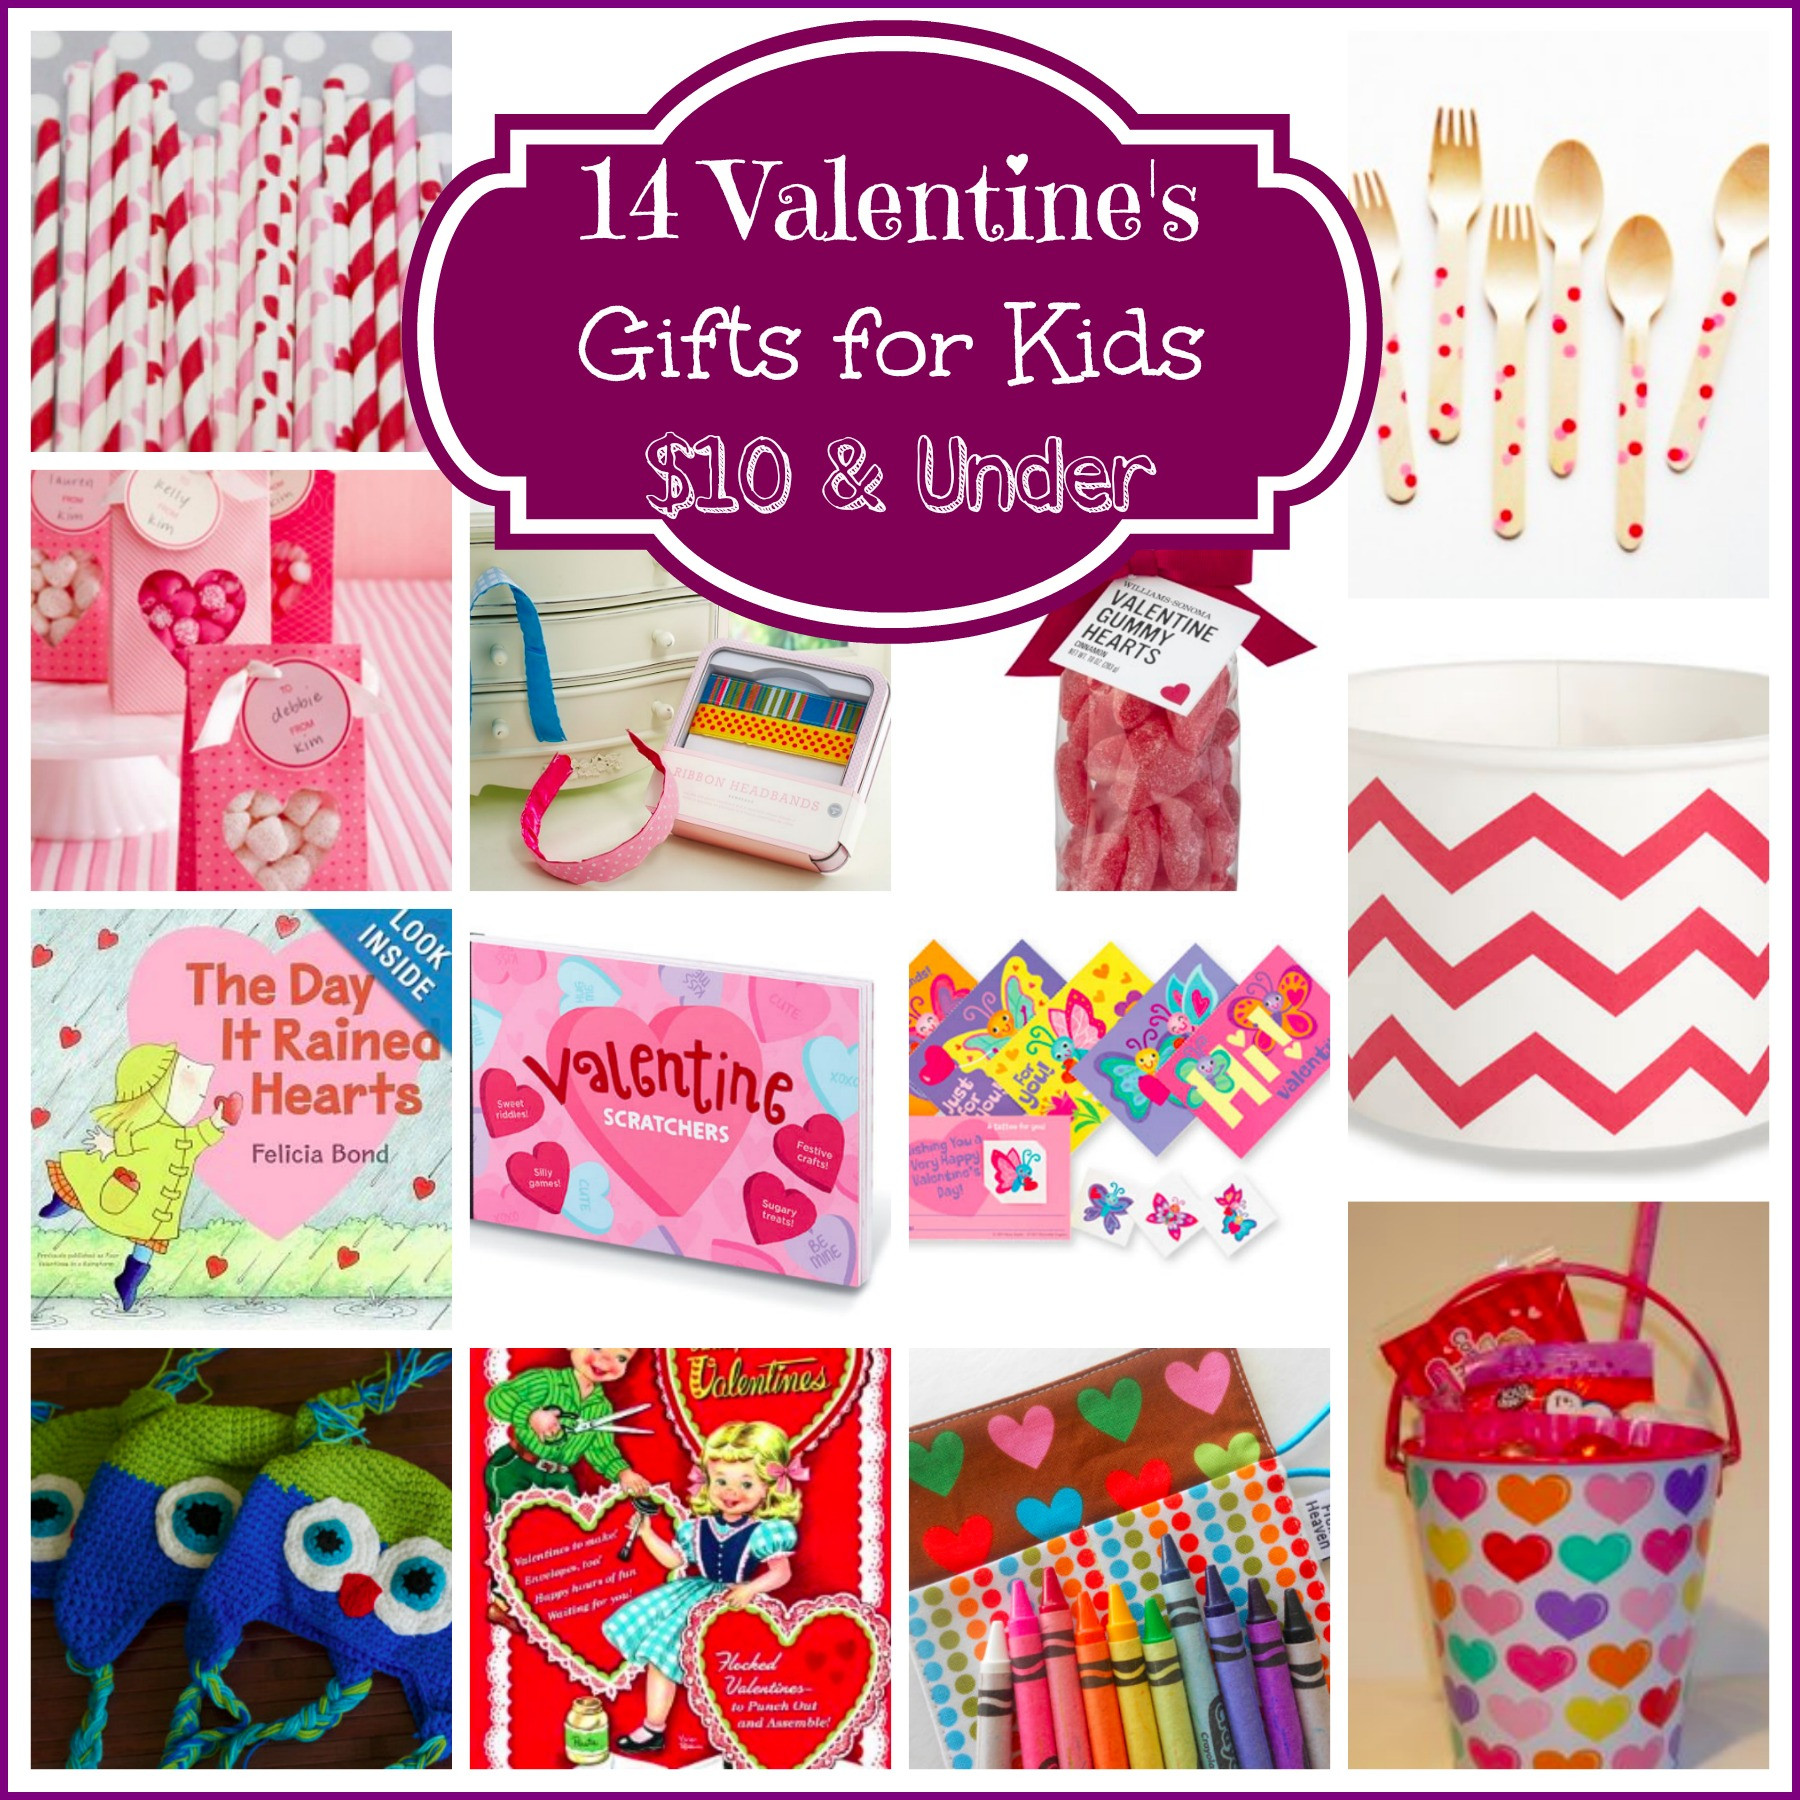 Gift Ideas For Kids For Valentines Day
 14 Valentine’s Day Gifts for Kids $10 & Under